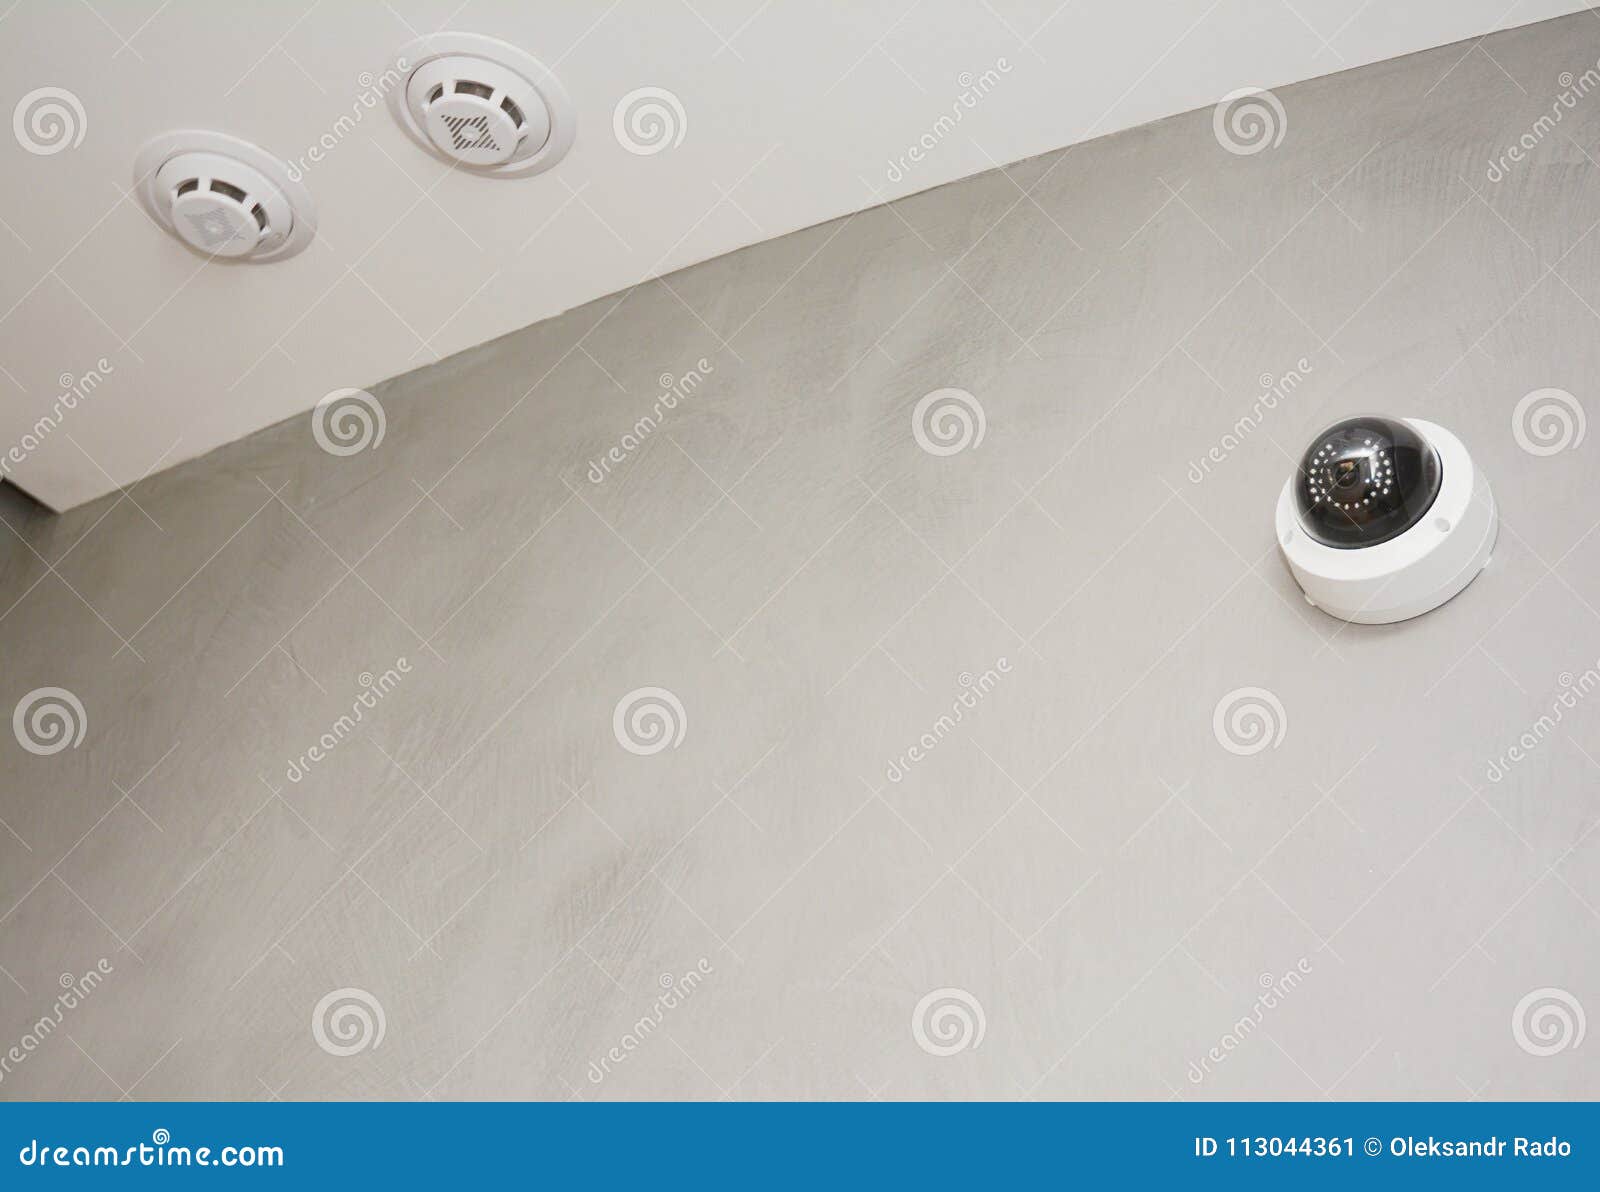 security cctv camera is mounted on the room wall with fire alarm system, fire detection